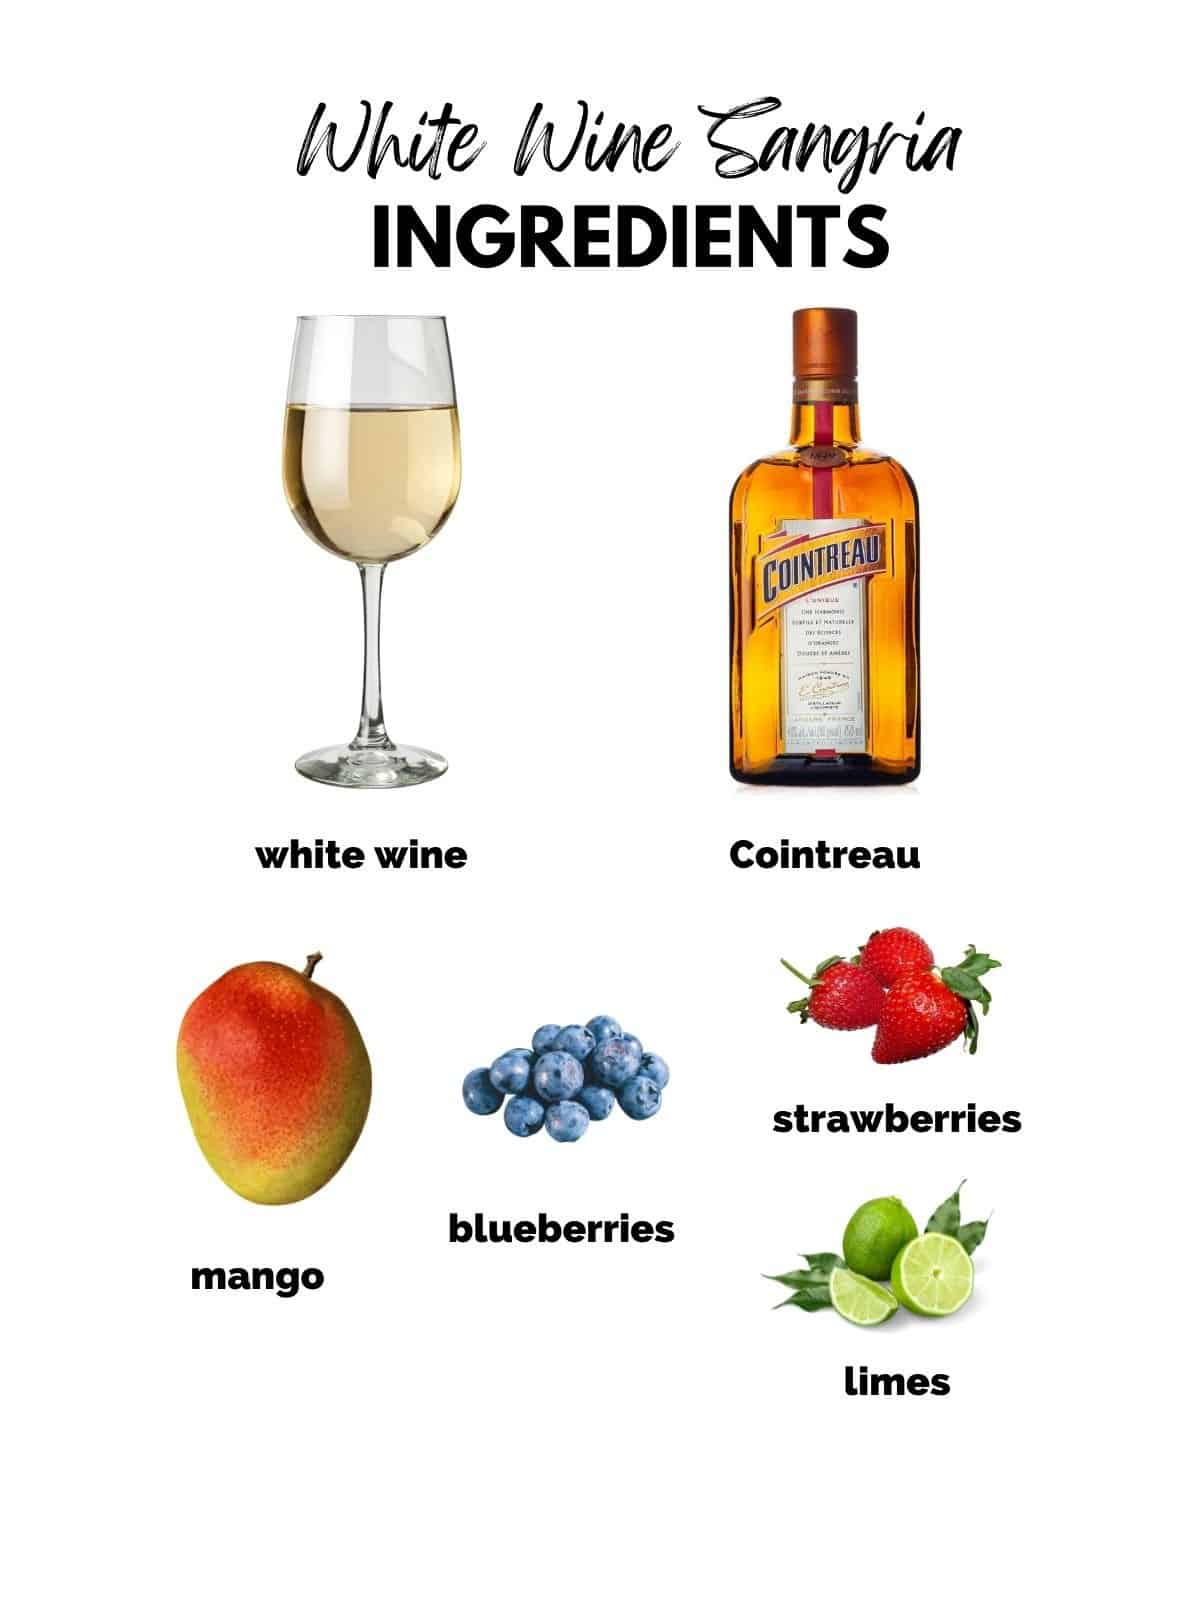 Ingredients for White Wine Sangria